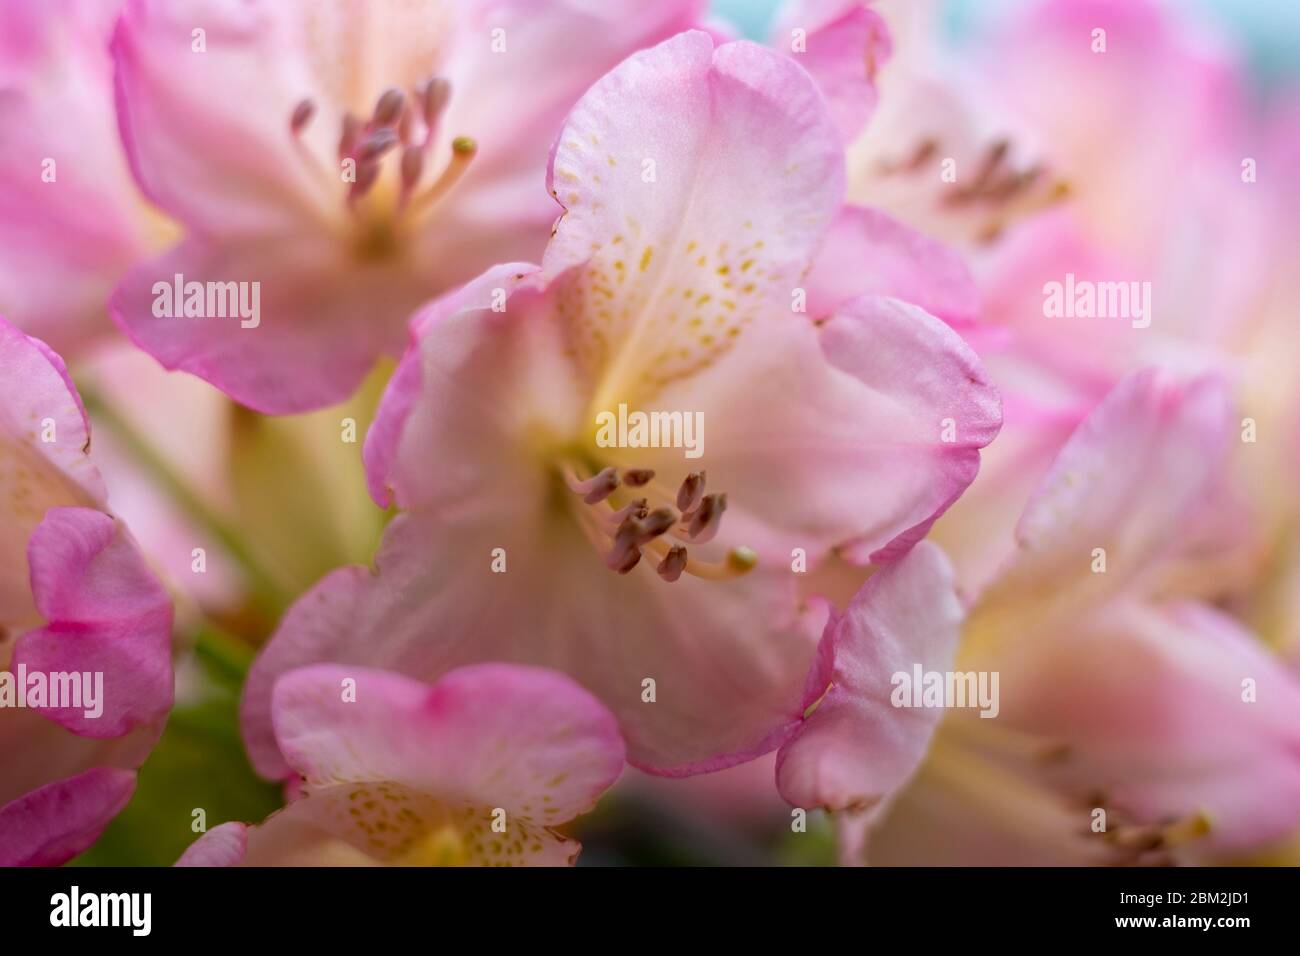 Pink rhodondendron flowers. Soft focus Stock Photo